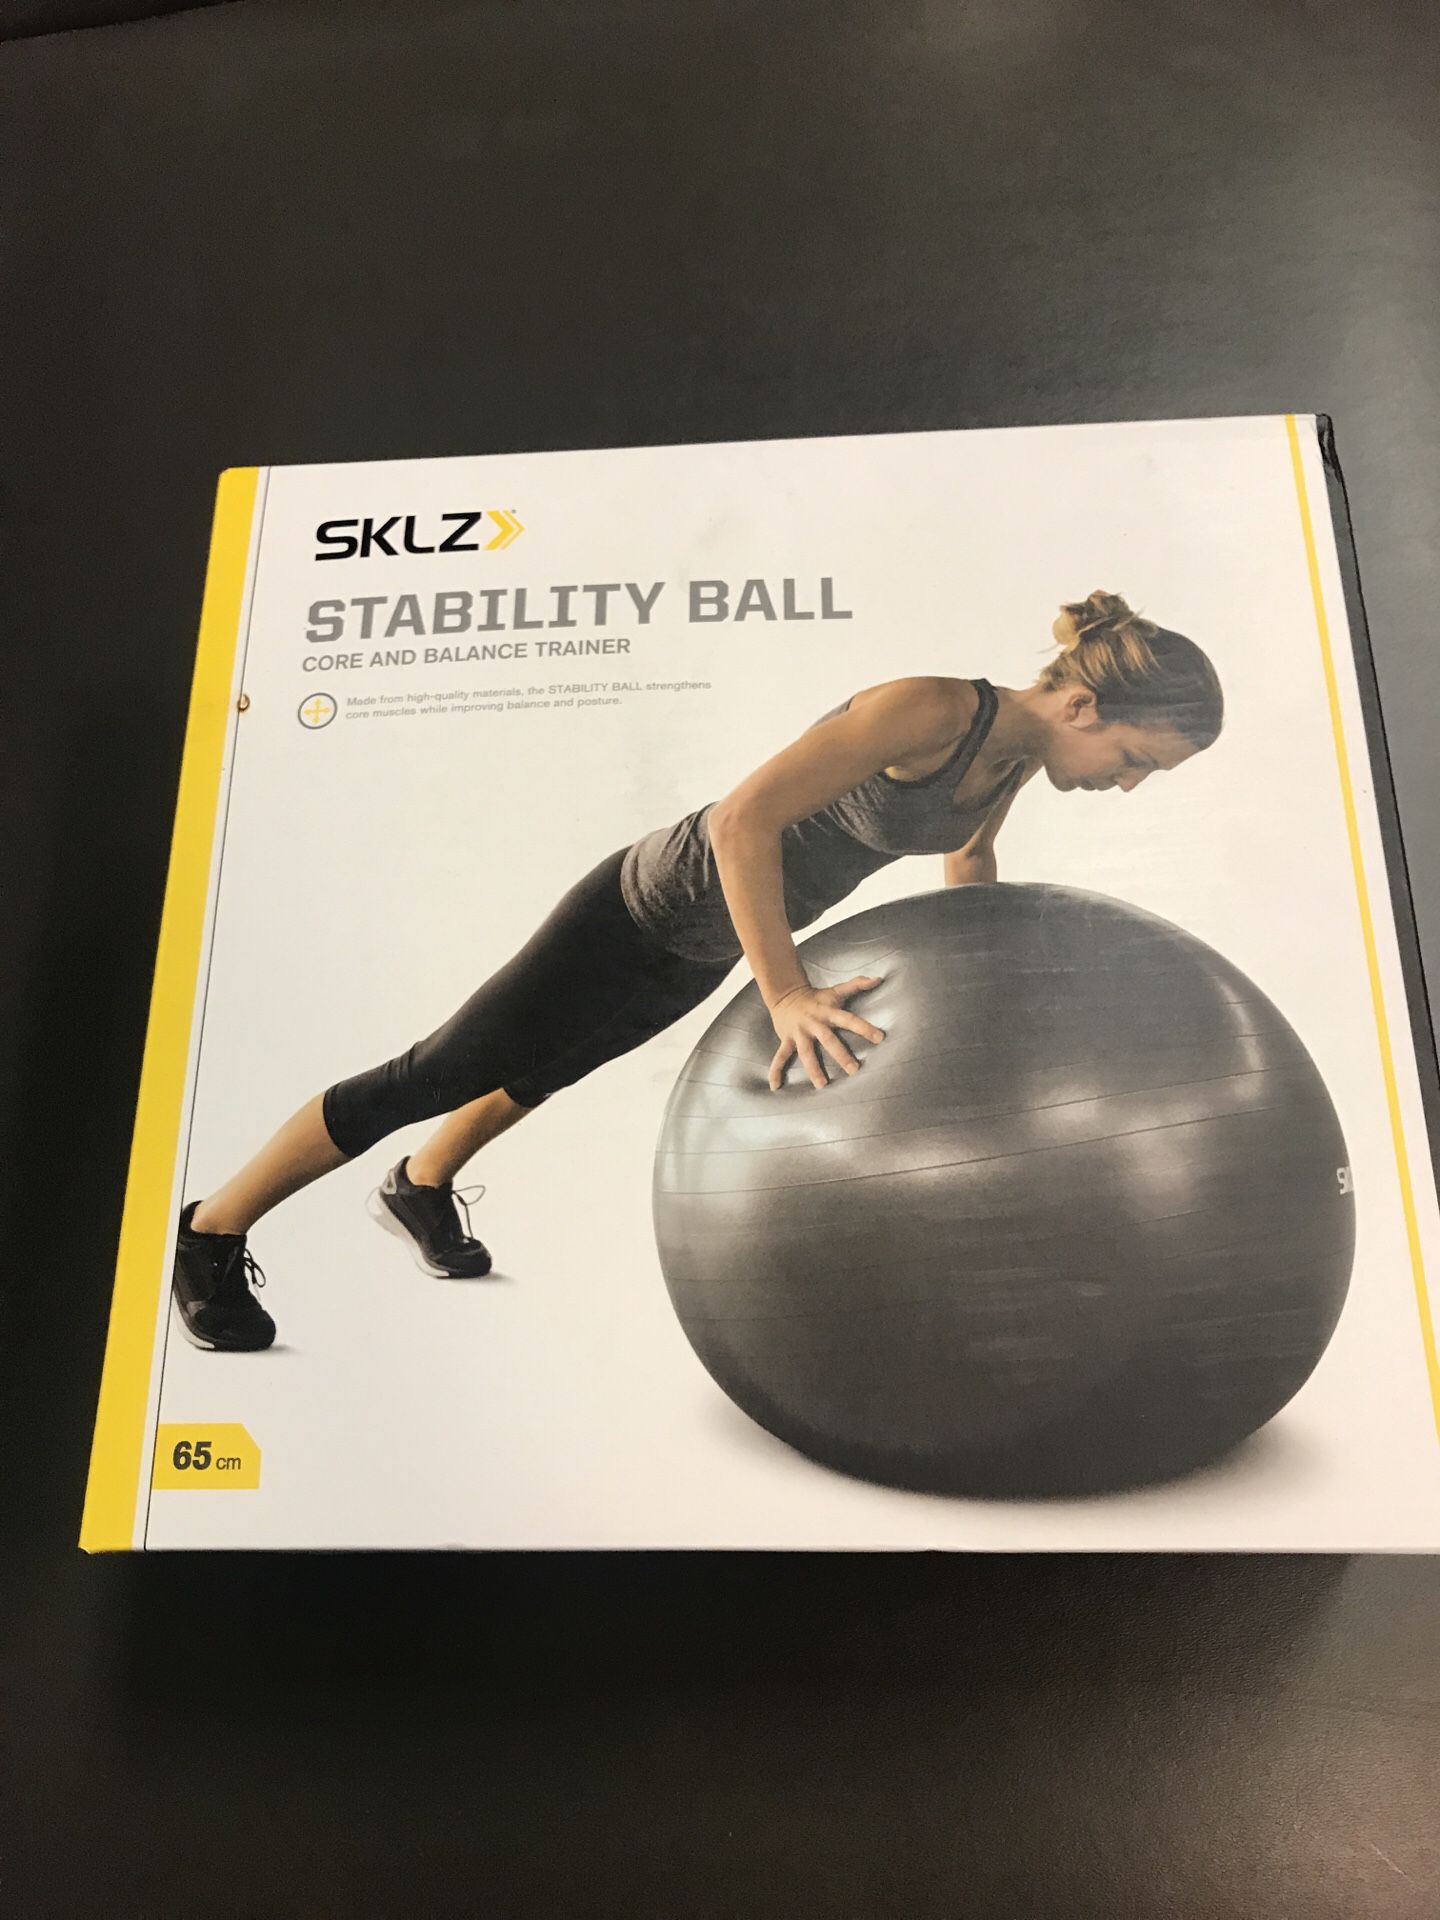 Skilz stability core Ball Swiss fitness exercise gym weight training